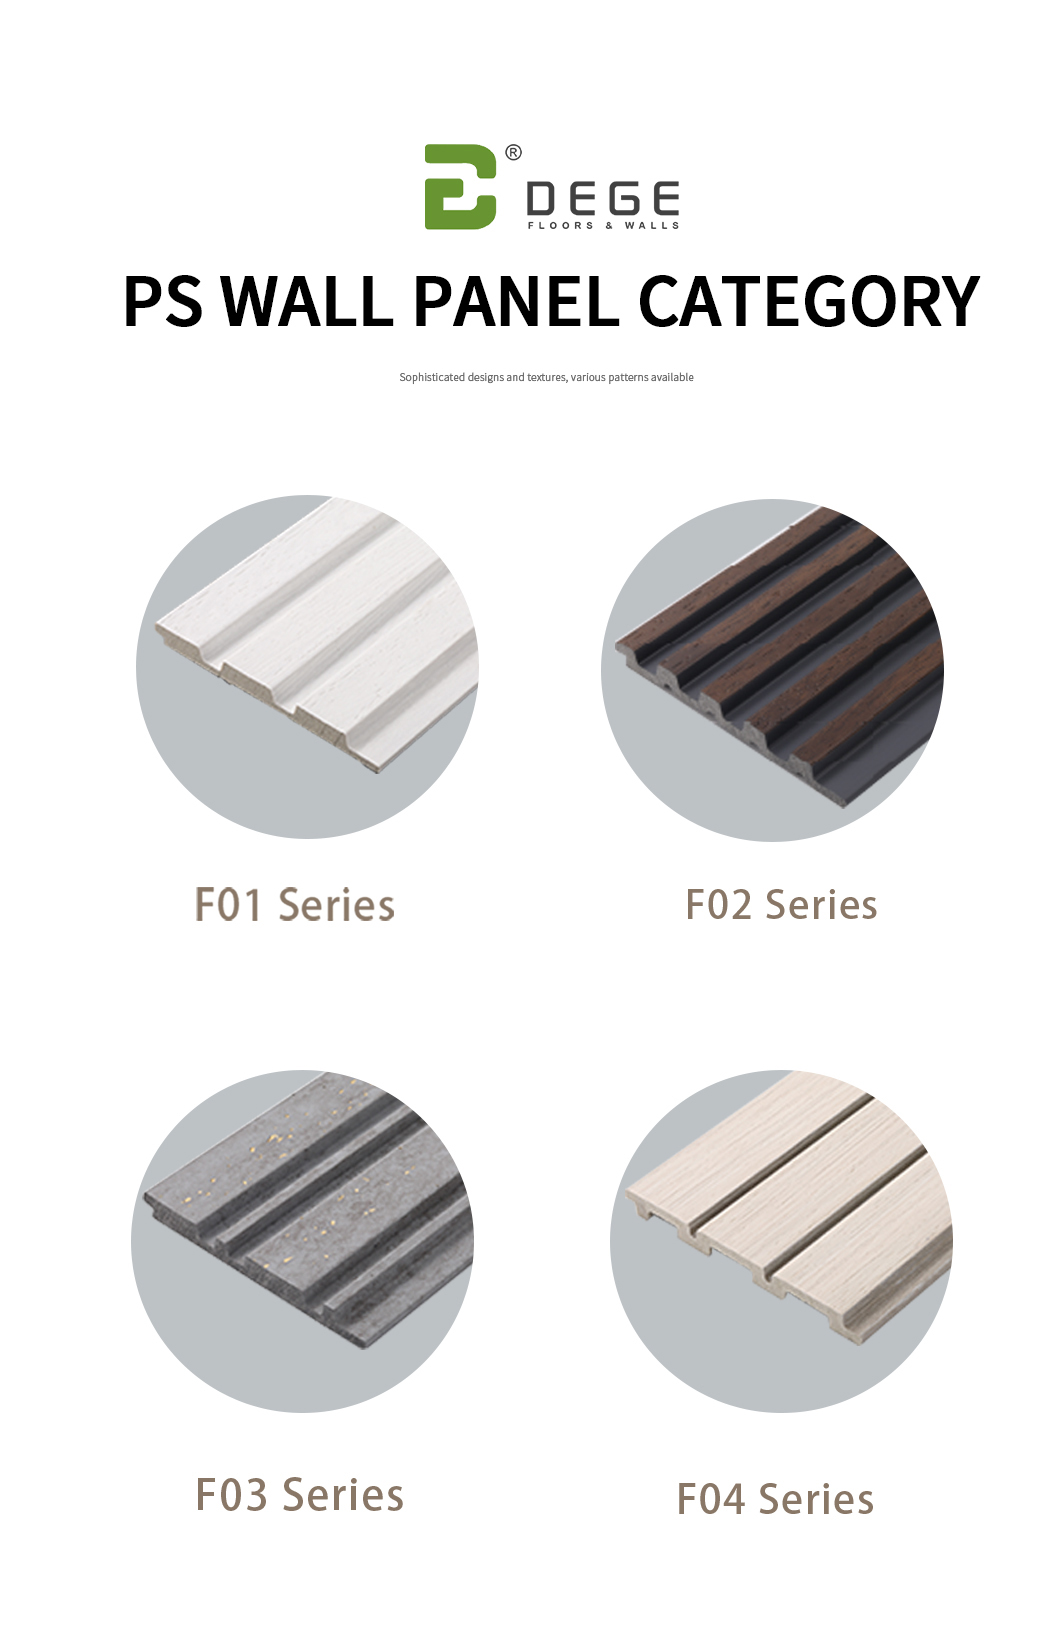 PS Wall Panel Specifications (5)